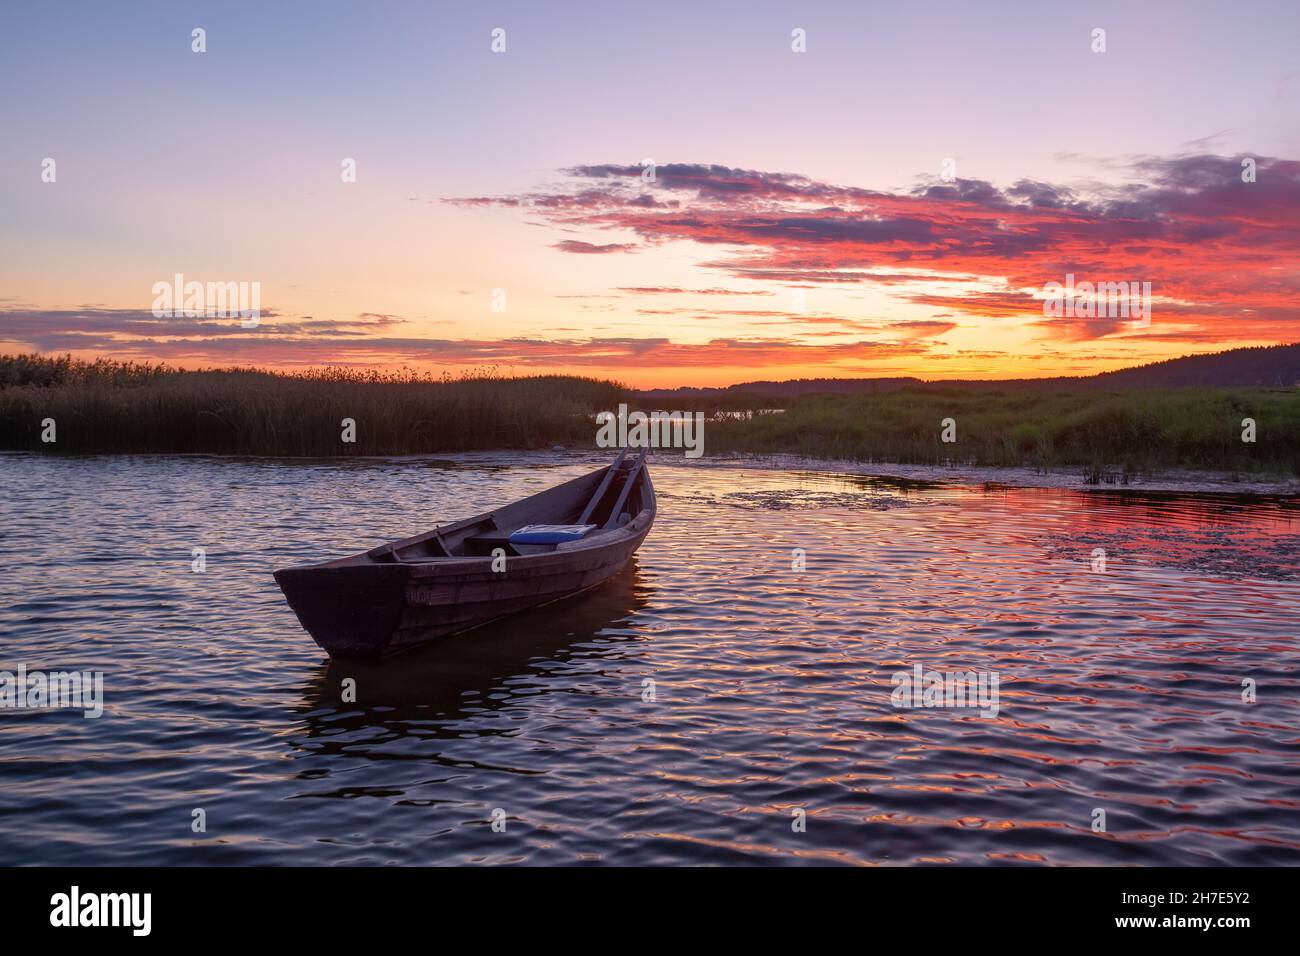 Lonely wooden boat in calm lake. Amazing sunrise in summer morning. The silhouette is reflecting on the water. Orange sky with clouds. Location place Stock Photo